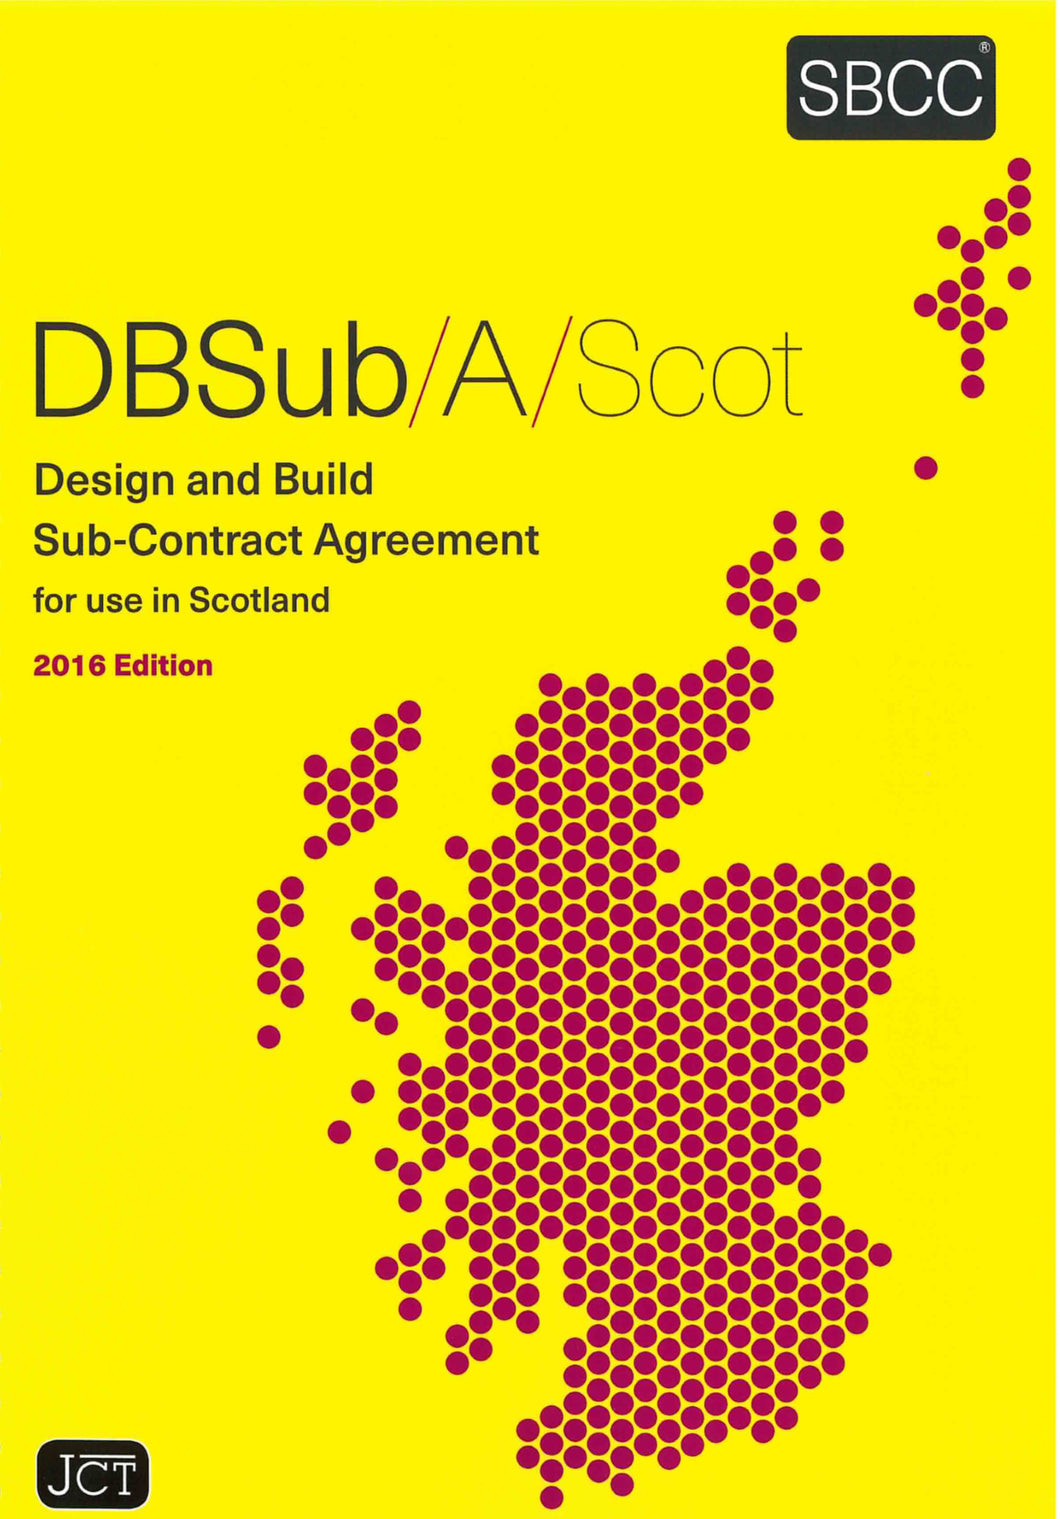 Design And Build Sub-Contract Agreement For Use In Scotland 2016